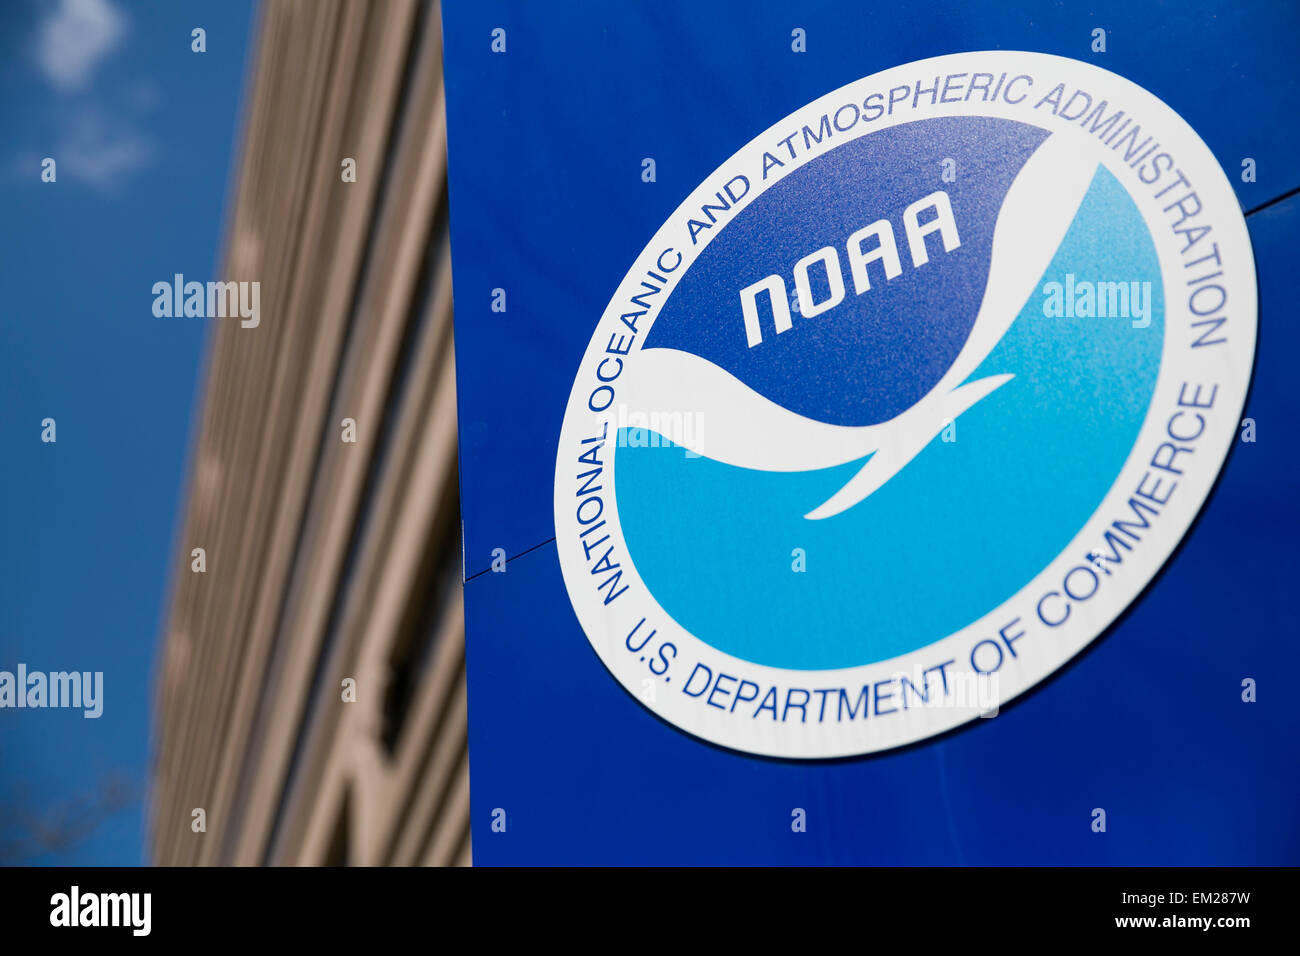 An exterior view of the headquarters of the National Oceanic and Atmospheric Administration (NOAA) in Silver Spring, Maryland. Stock Photo